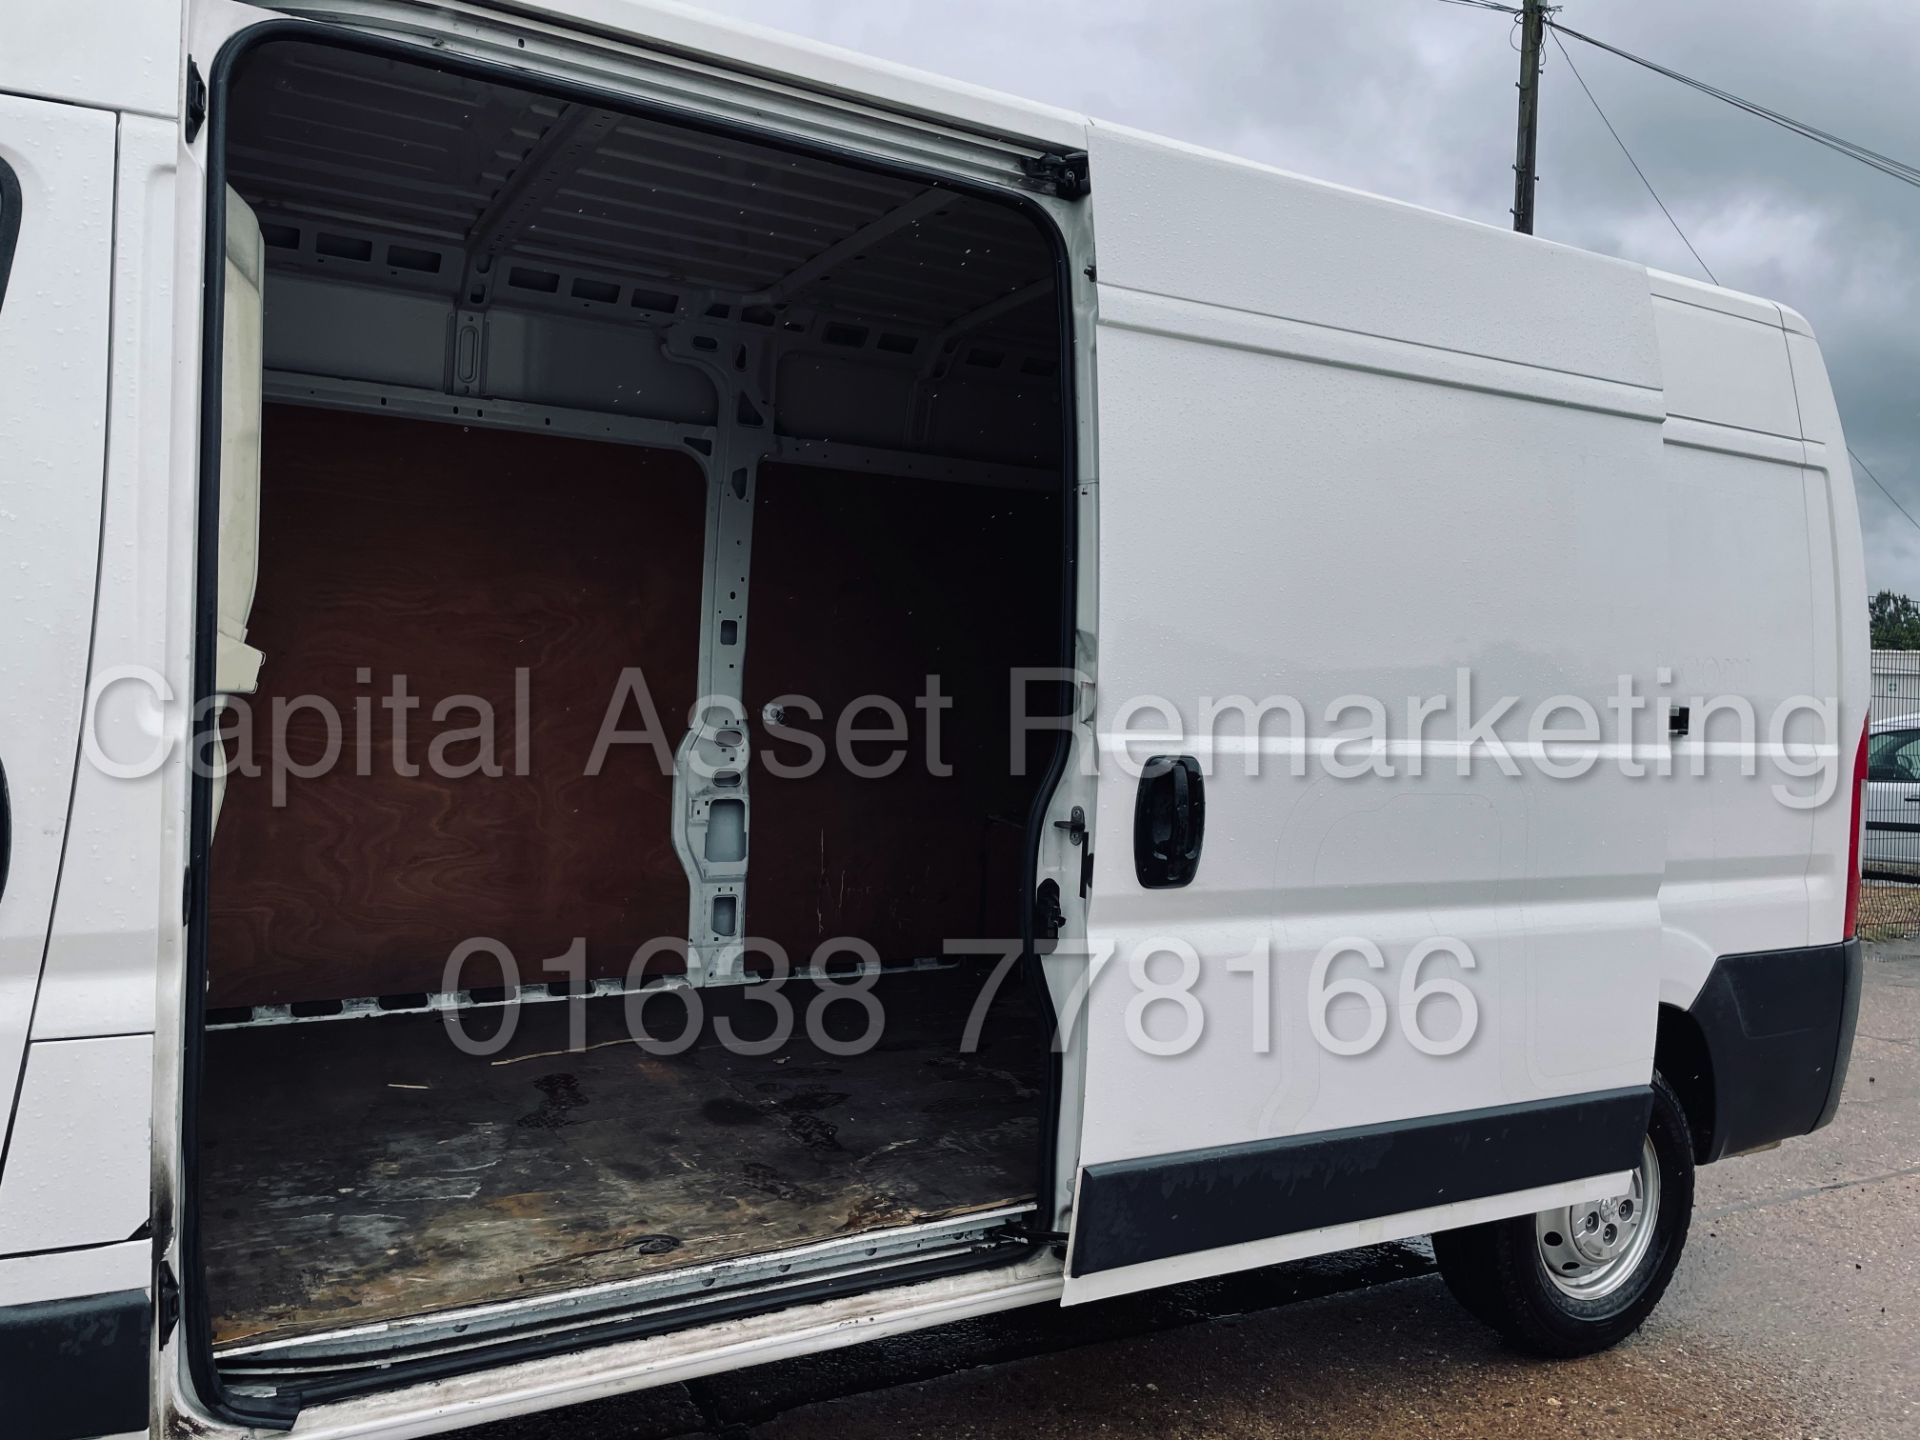 PEUGEOT BOXER 335 *PROFESSIONAL* LWB HI-ROOF (2016) '2.2 HDI - 130 BHP - 6 SPEED' *A/C* (1 OWNER) - Image 22 of 41